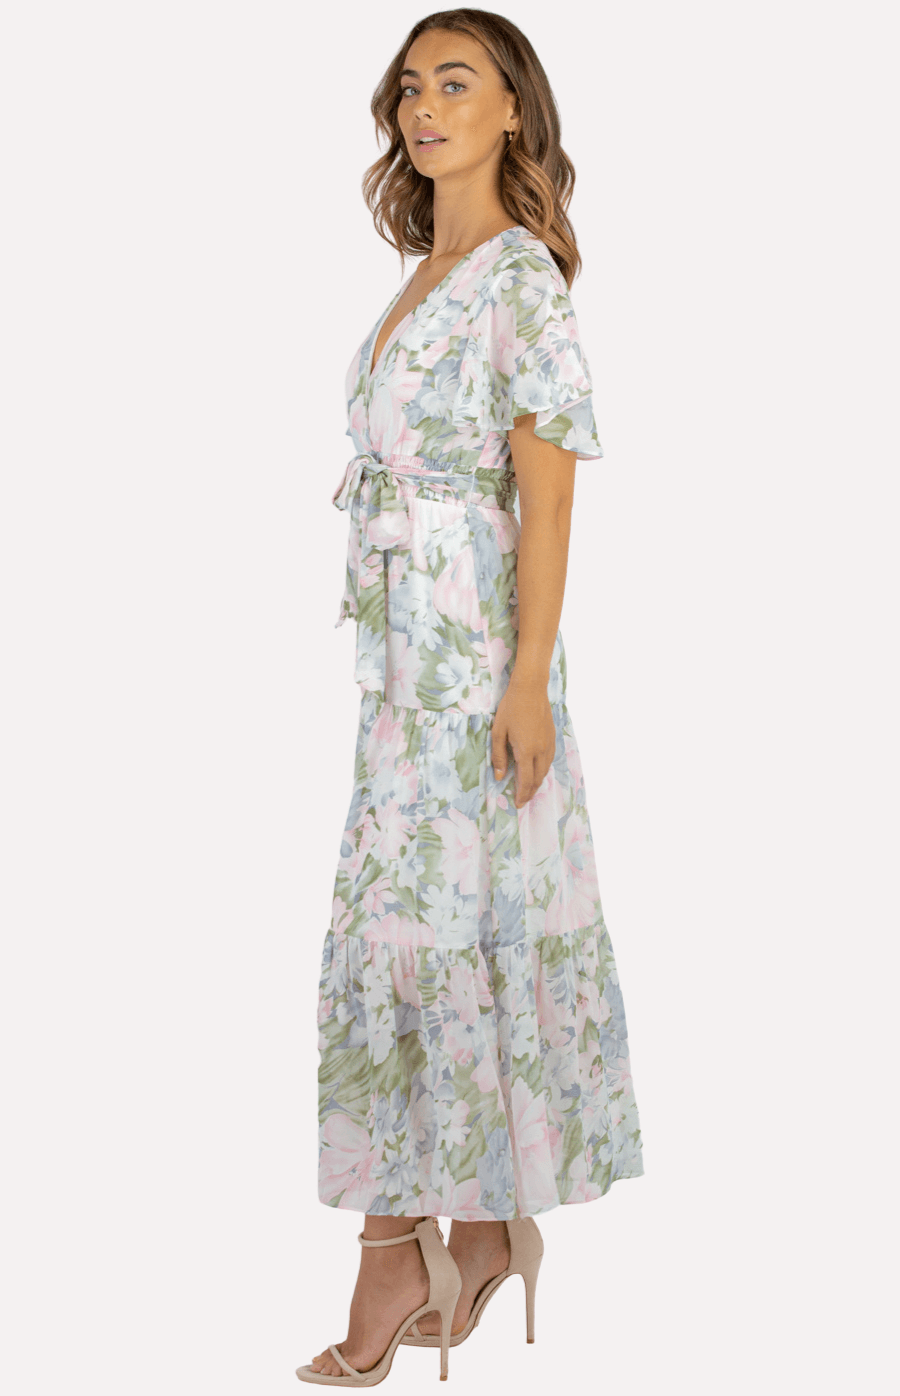 Marcelina Maxi Dress in Pink & Lilac Floral - Ophelia Fox Boutique